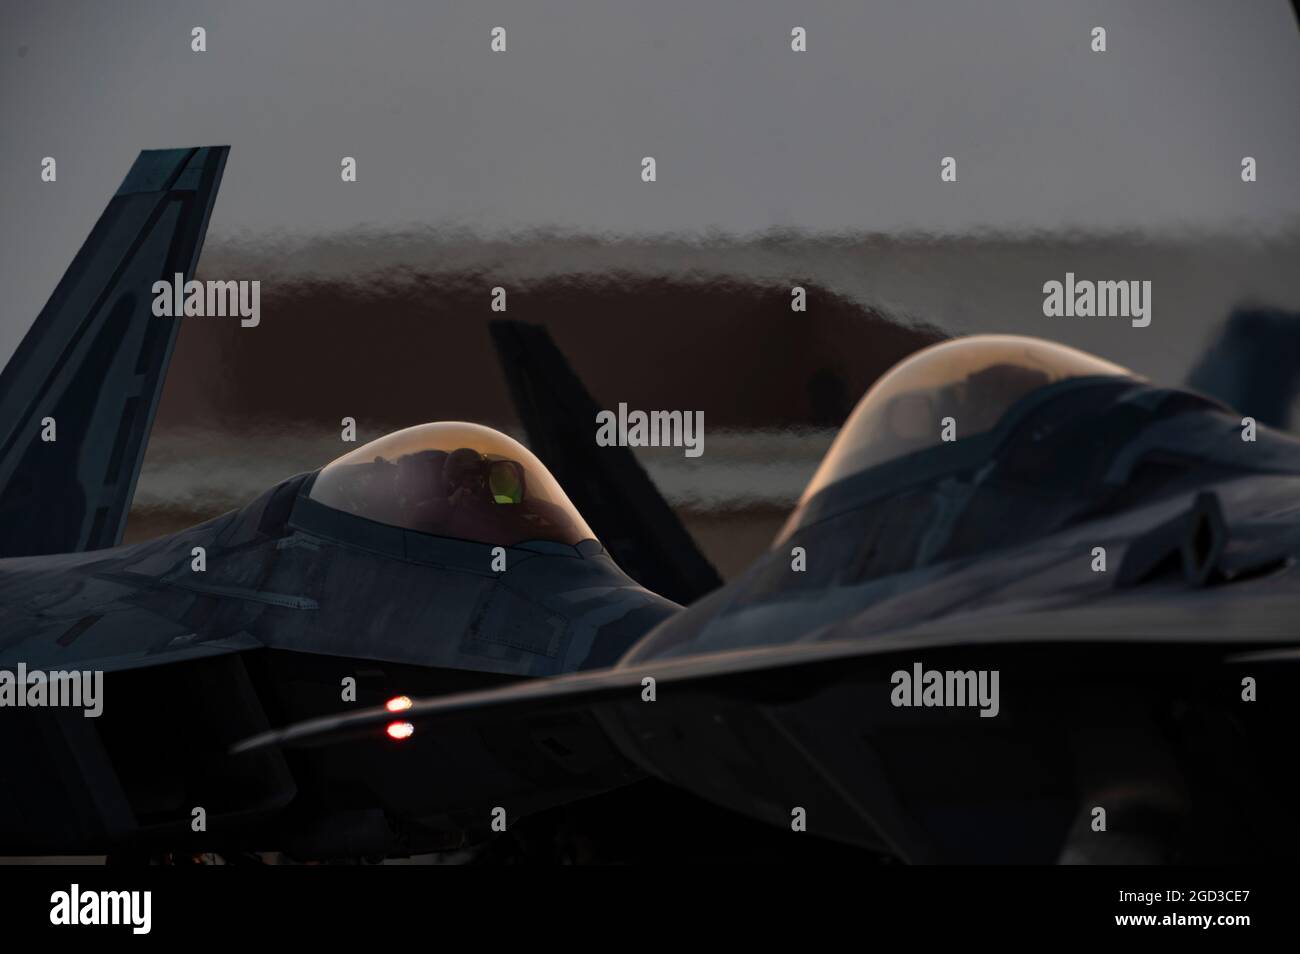 Two F-22 Raptors assigned to the 1st Fighter Wing, Langley Air Force Base, Virginia, are started up for a night training mission during Red Flag-Nellis 21-3 at Nellis Air Force Base, Nevada Aug. 4, 2021. The 1st FW hosted RF-Nellis 21-3 as the lead wing with nearly 100 aircraft, such as the F-35, F-35, F-22, F-16CJ, F-16C, EC-130H, EA-18G, B-52, B-2, F/A-18 C/D, MQ-9, E-3, E-8, RC-135, RQ-4B30, RQ-4B40, U-2, HH-60, HC-130, KC-135 and KC-46 participated in complex mission scenarios against aggressor forces. (U.S. Air Force photo by Tech. Sgt. Alexandre Montes) Stock Photo